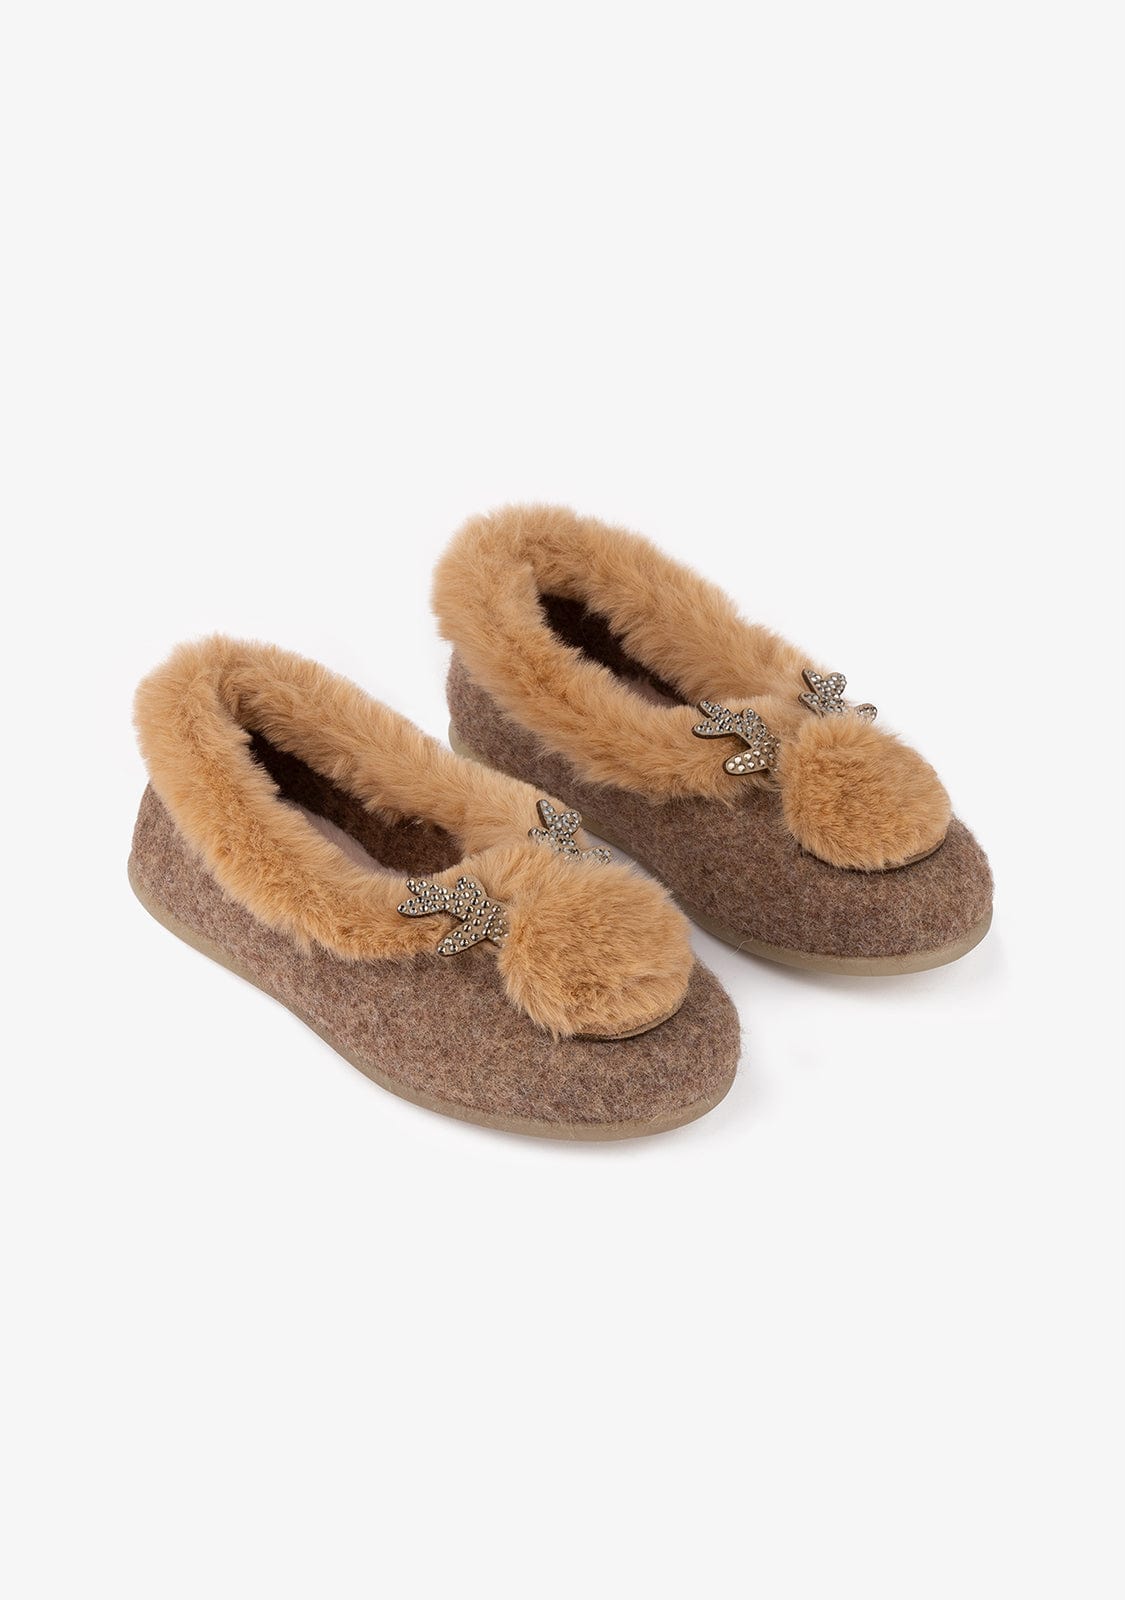 CONGUITOS Shoes Girl's Brown Glows in the Dark Reindeer Home Slippers